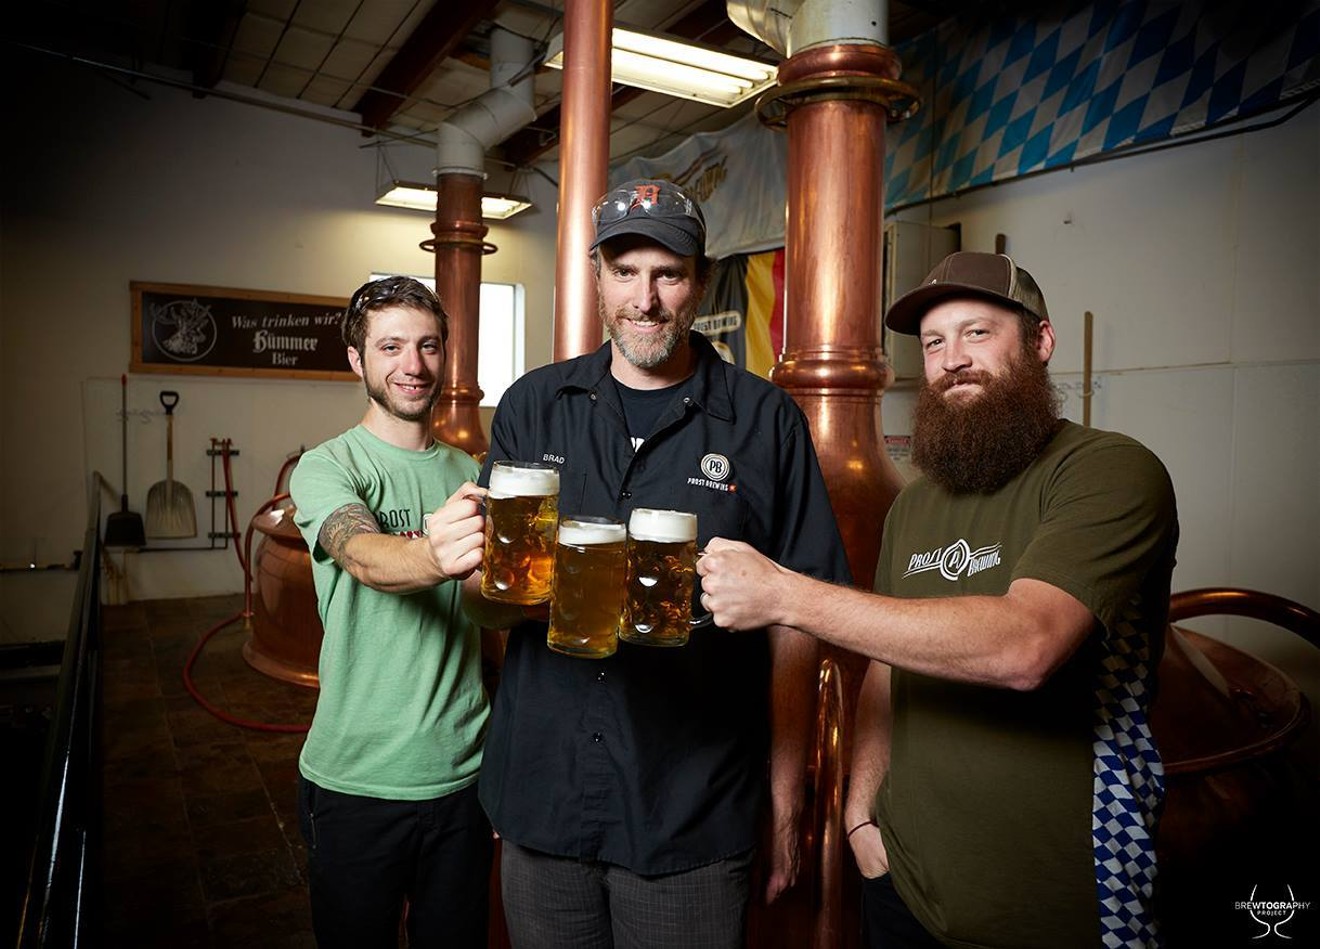 Brad Landman (center) has been toasting at Prost since 2014.